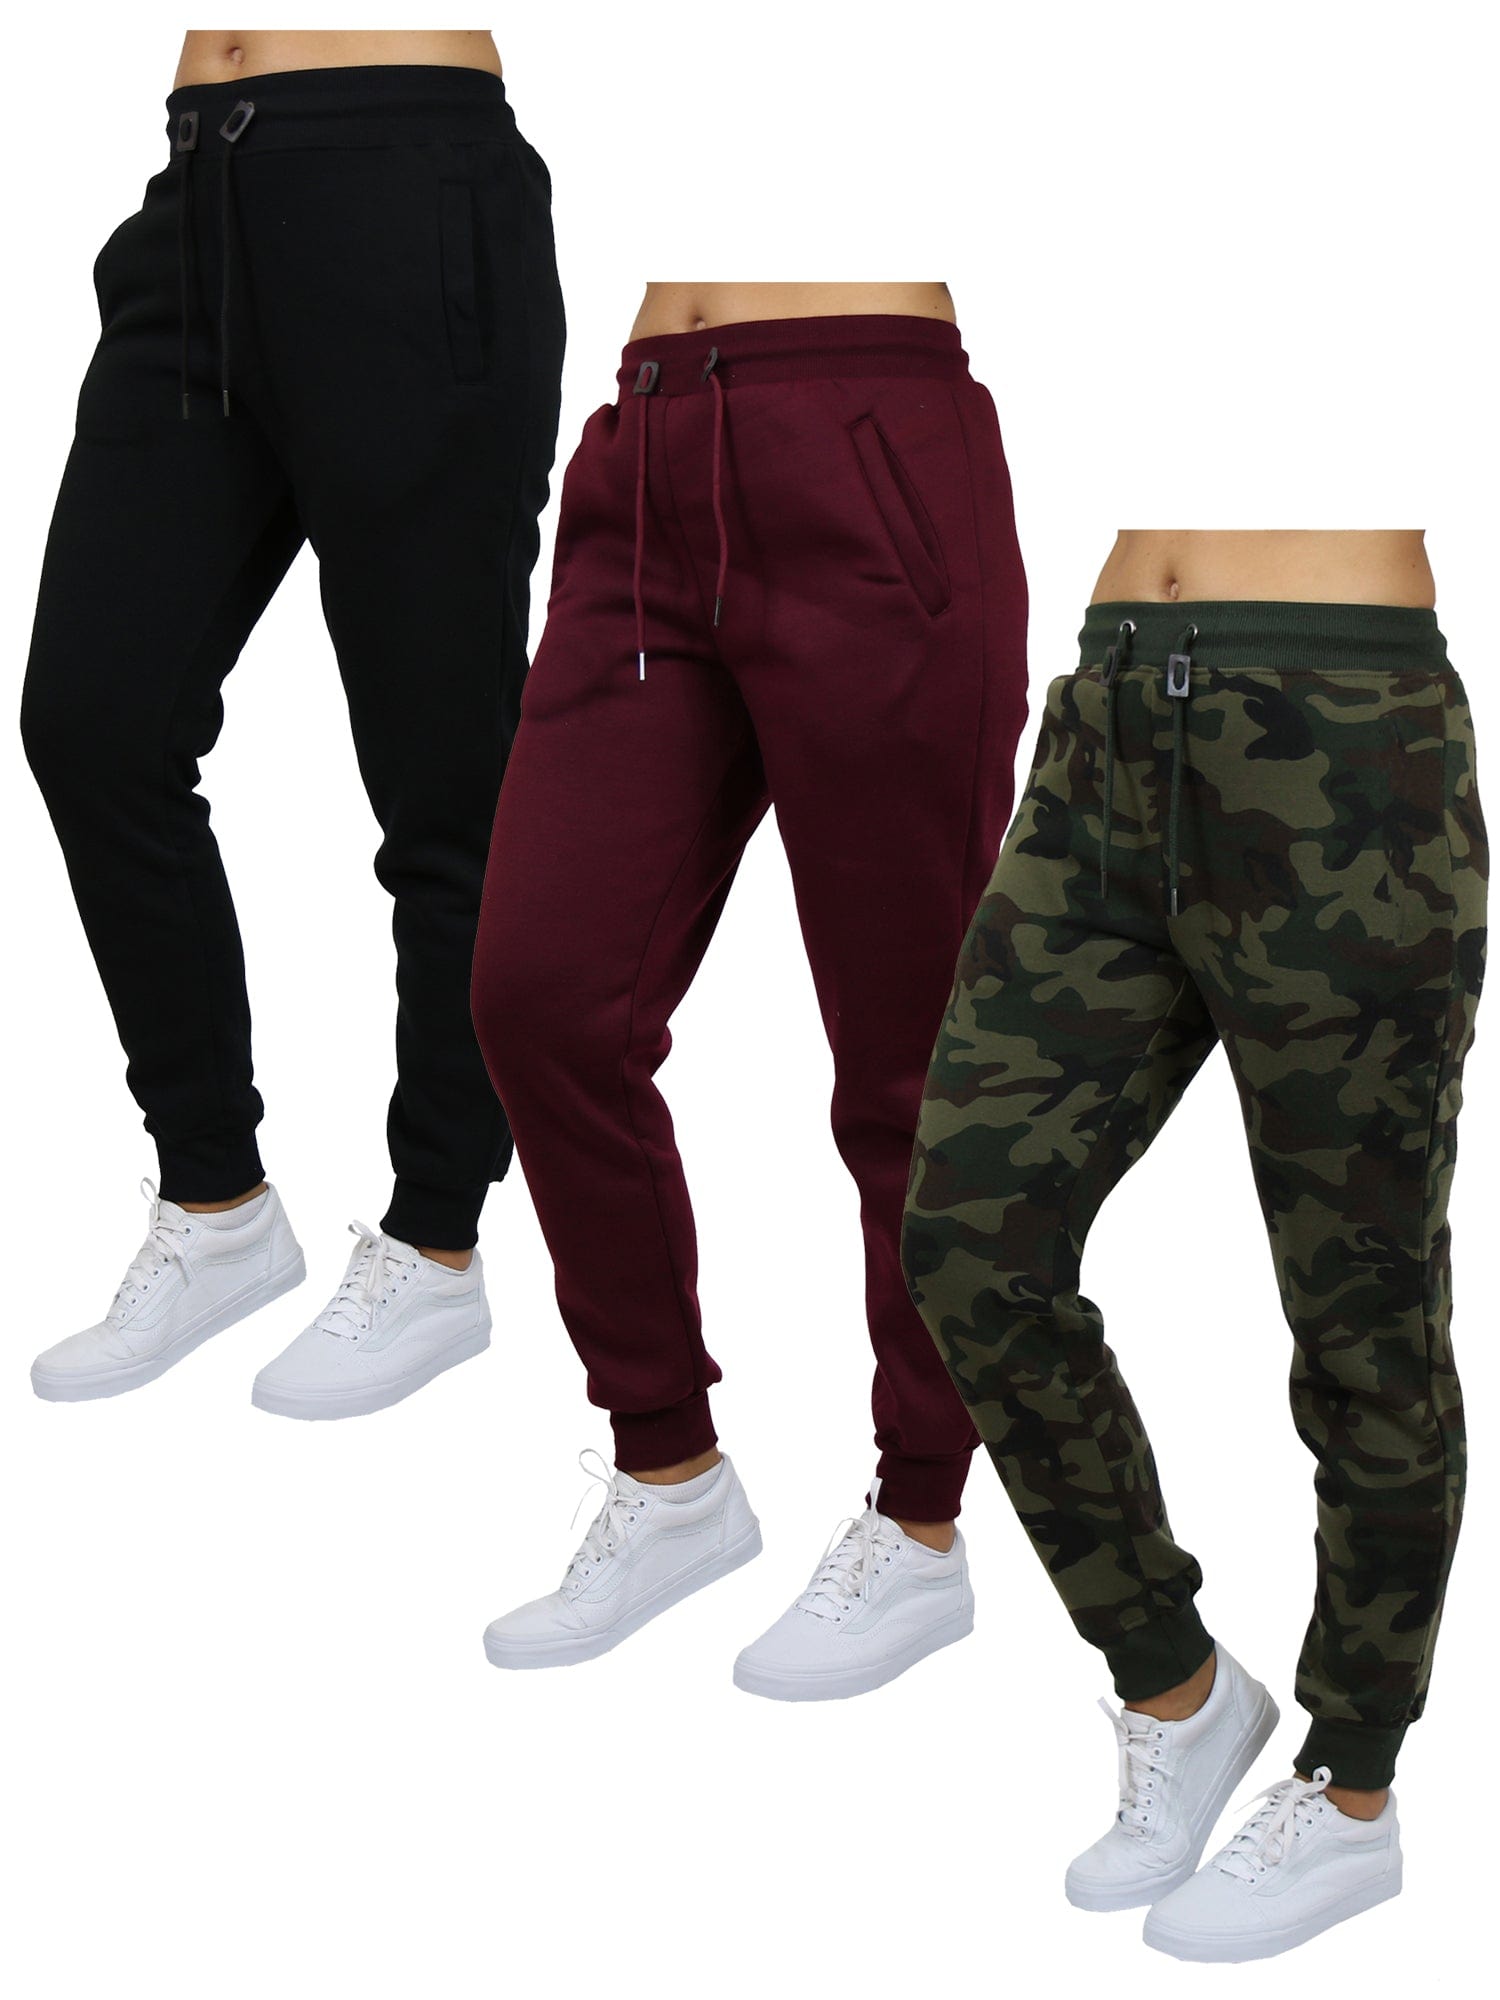 3-Pack Women's Fleece & French Terry Oversized Loose-Fit Jogger Sweatpants (S-2XL) - GalaxybyHarvic